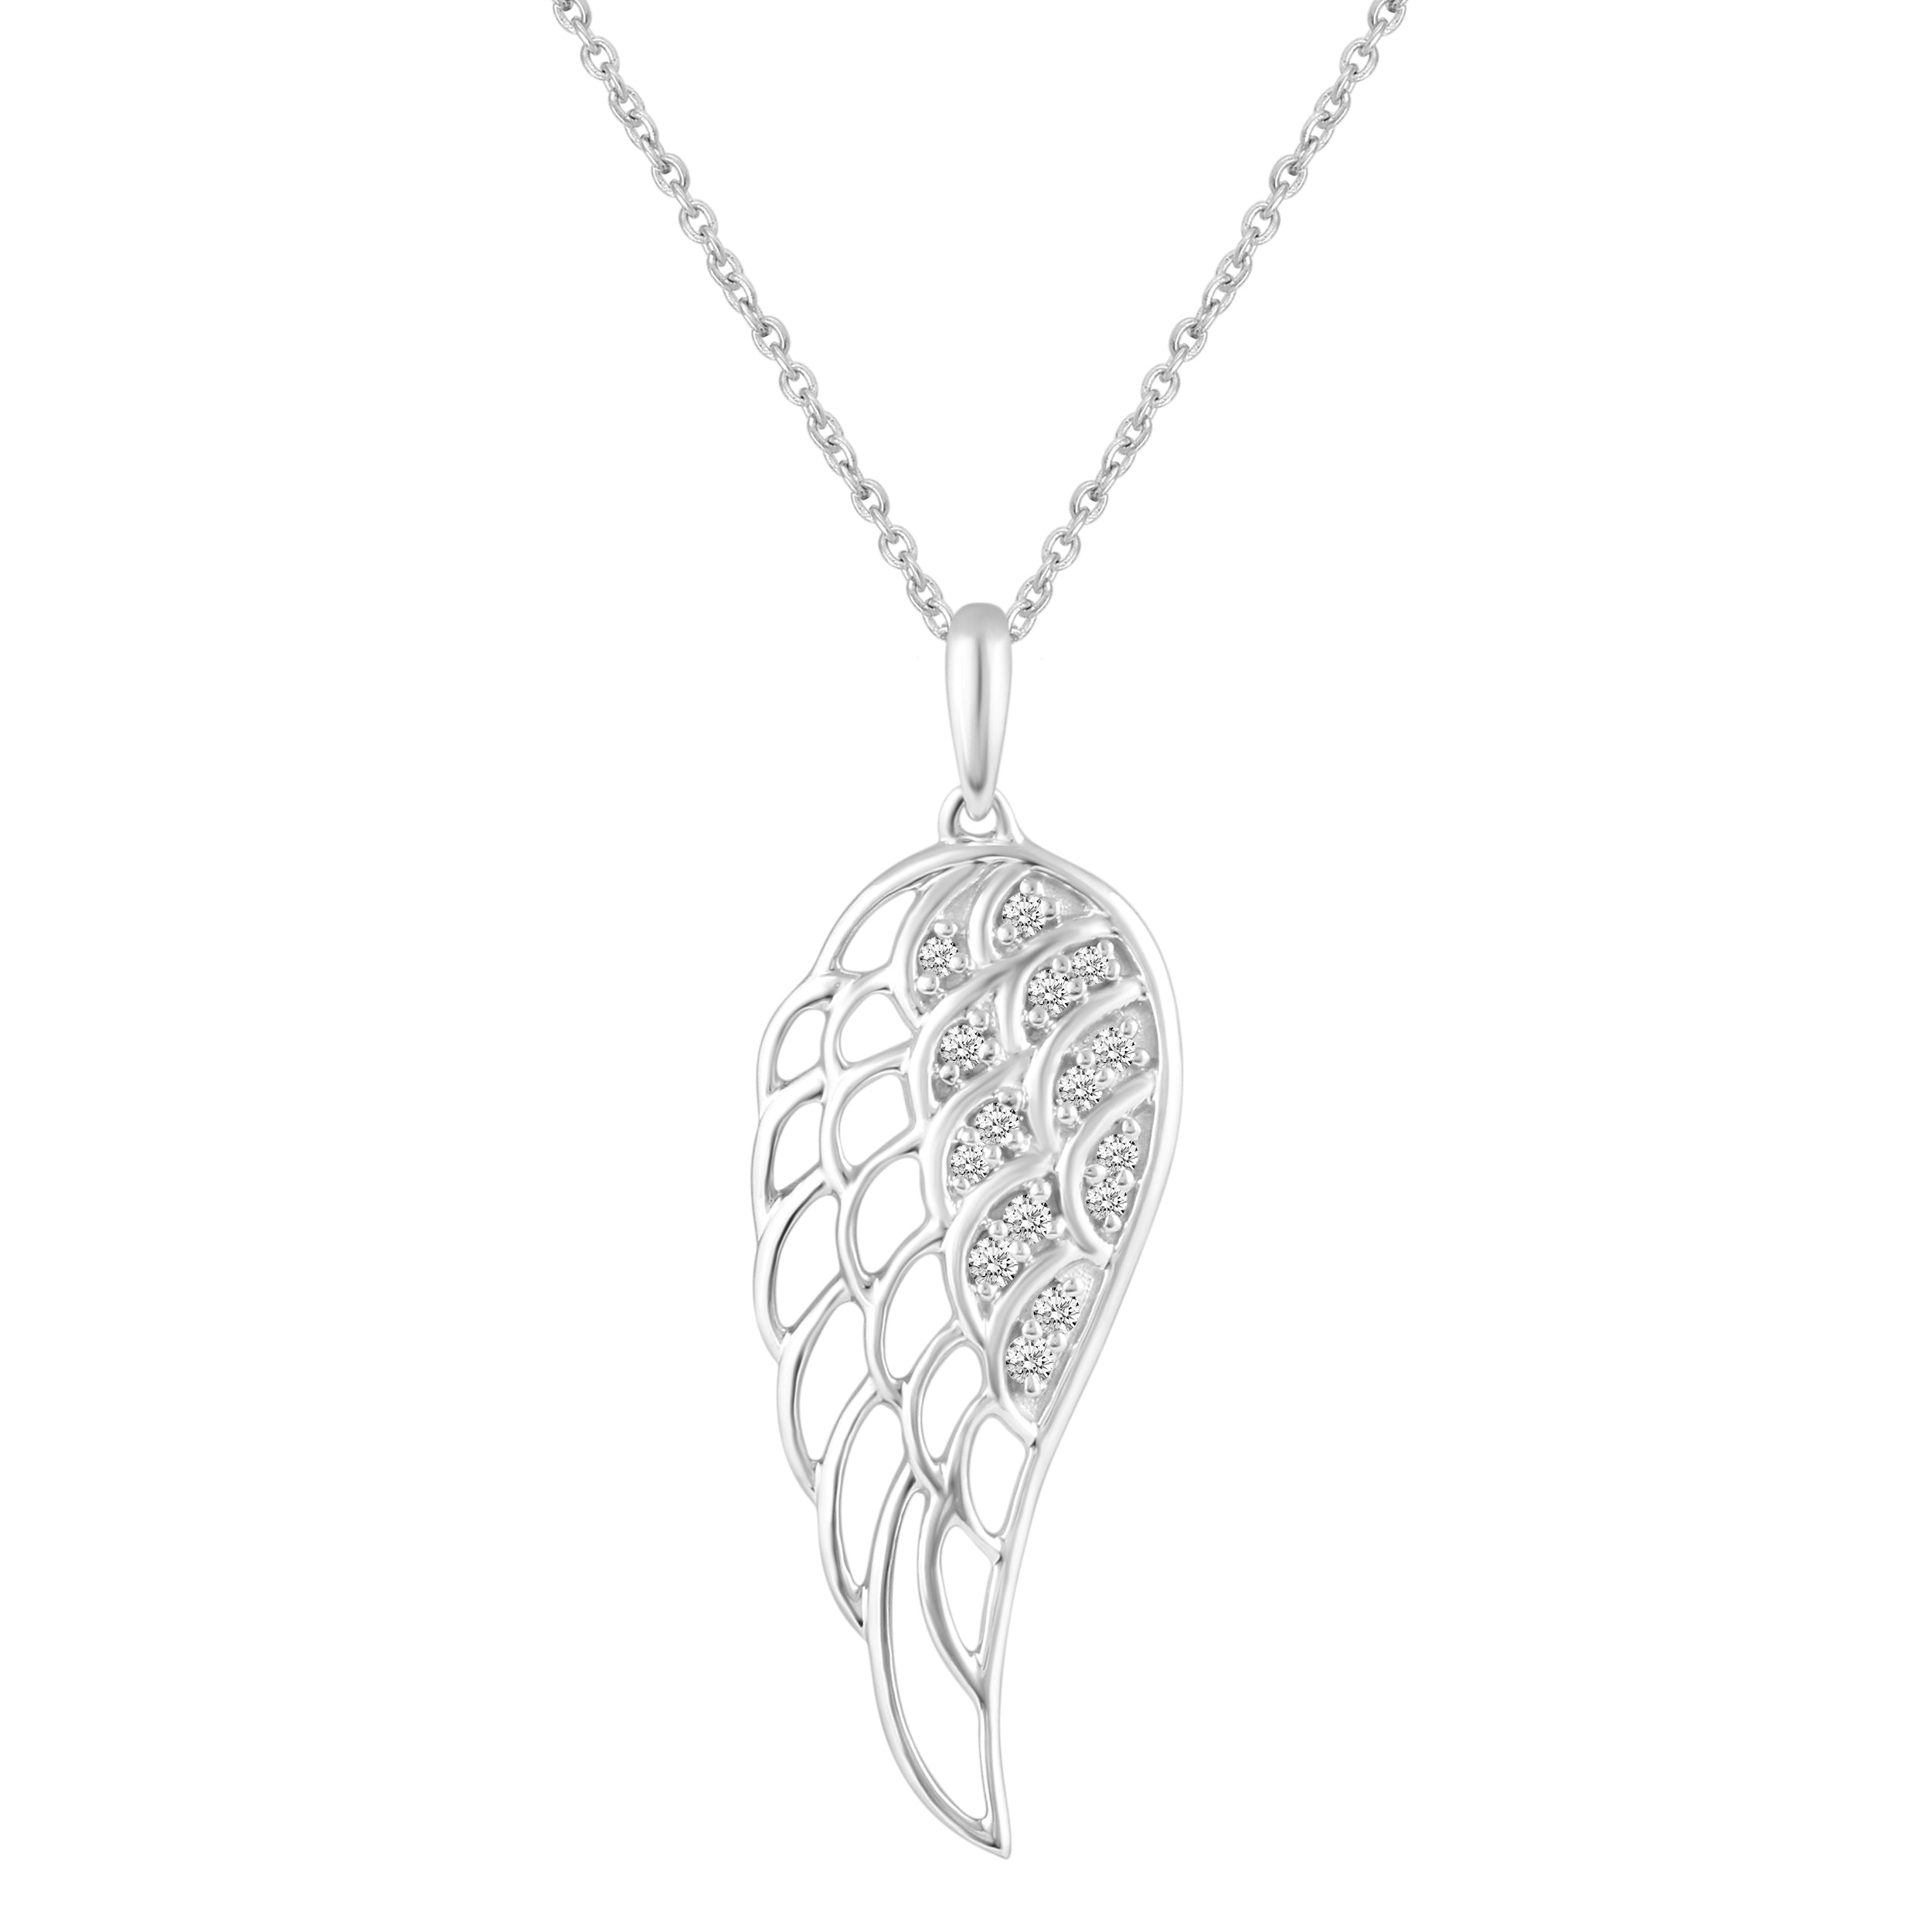 Angel Wing Feather Charm Necklace Pendant in 925 Sterling Silver